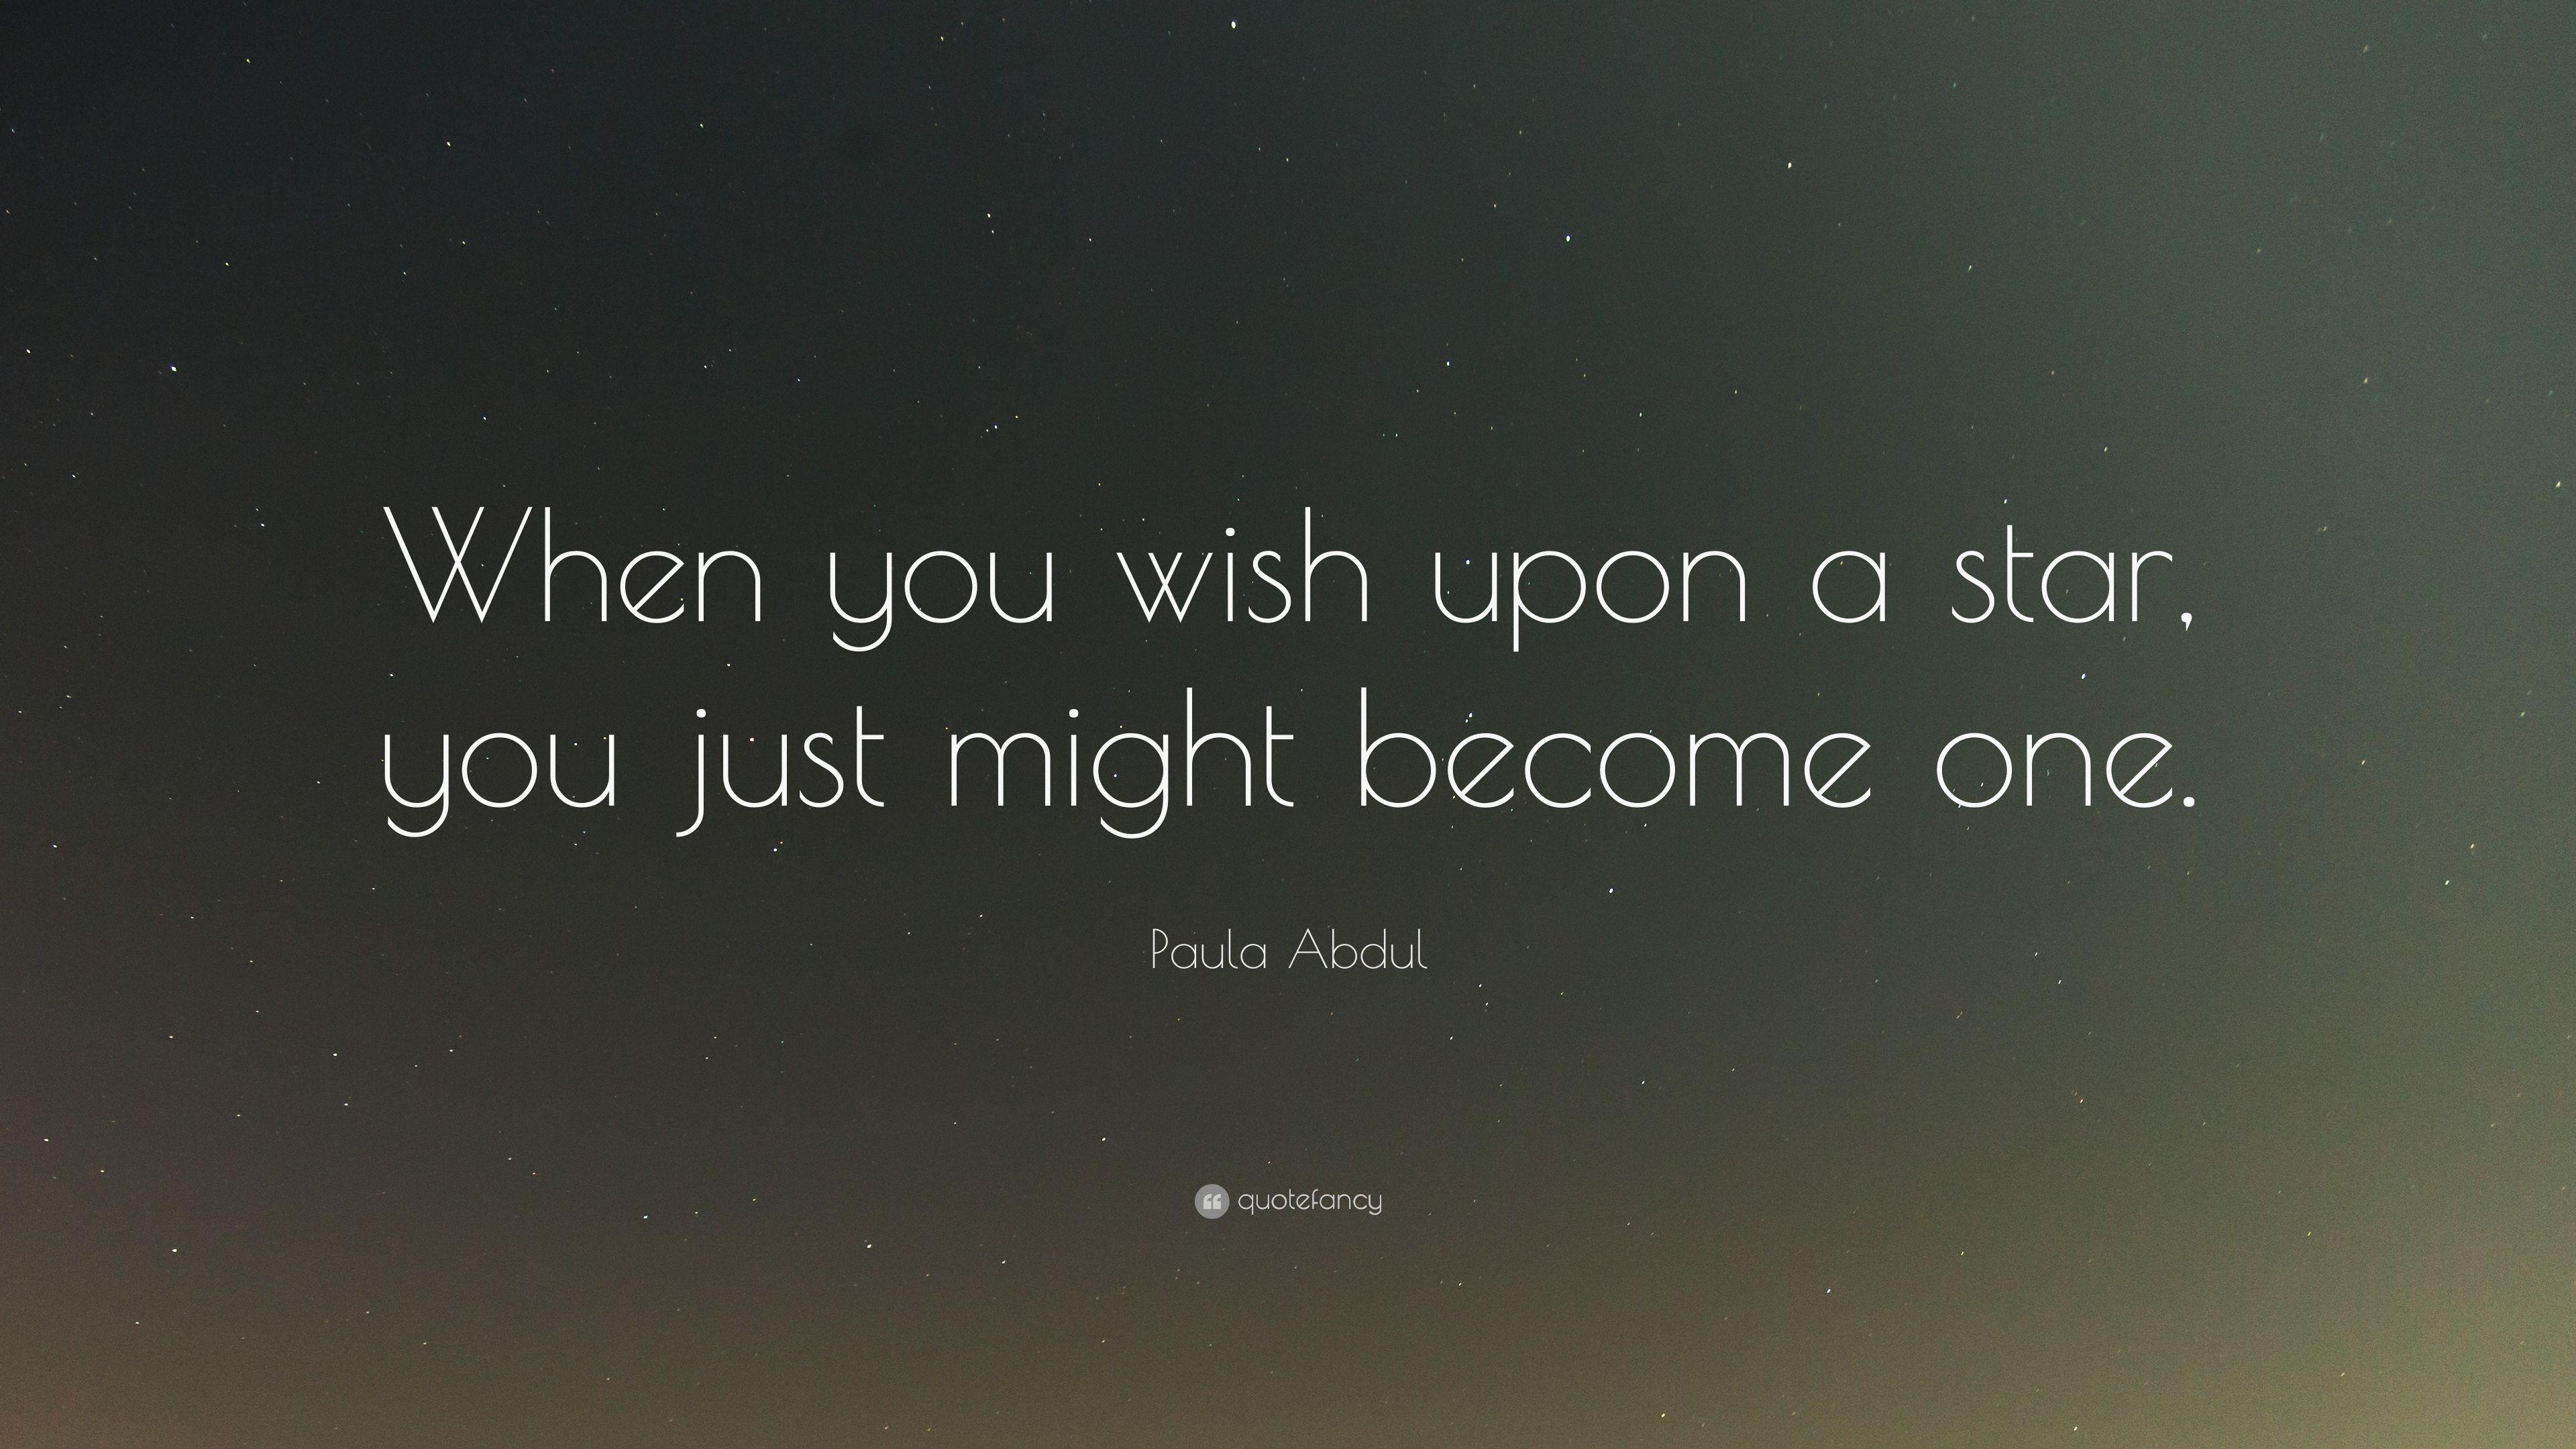 Paula Abdul Quote: “When you wish upon a star, you just might become